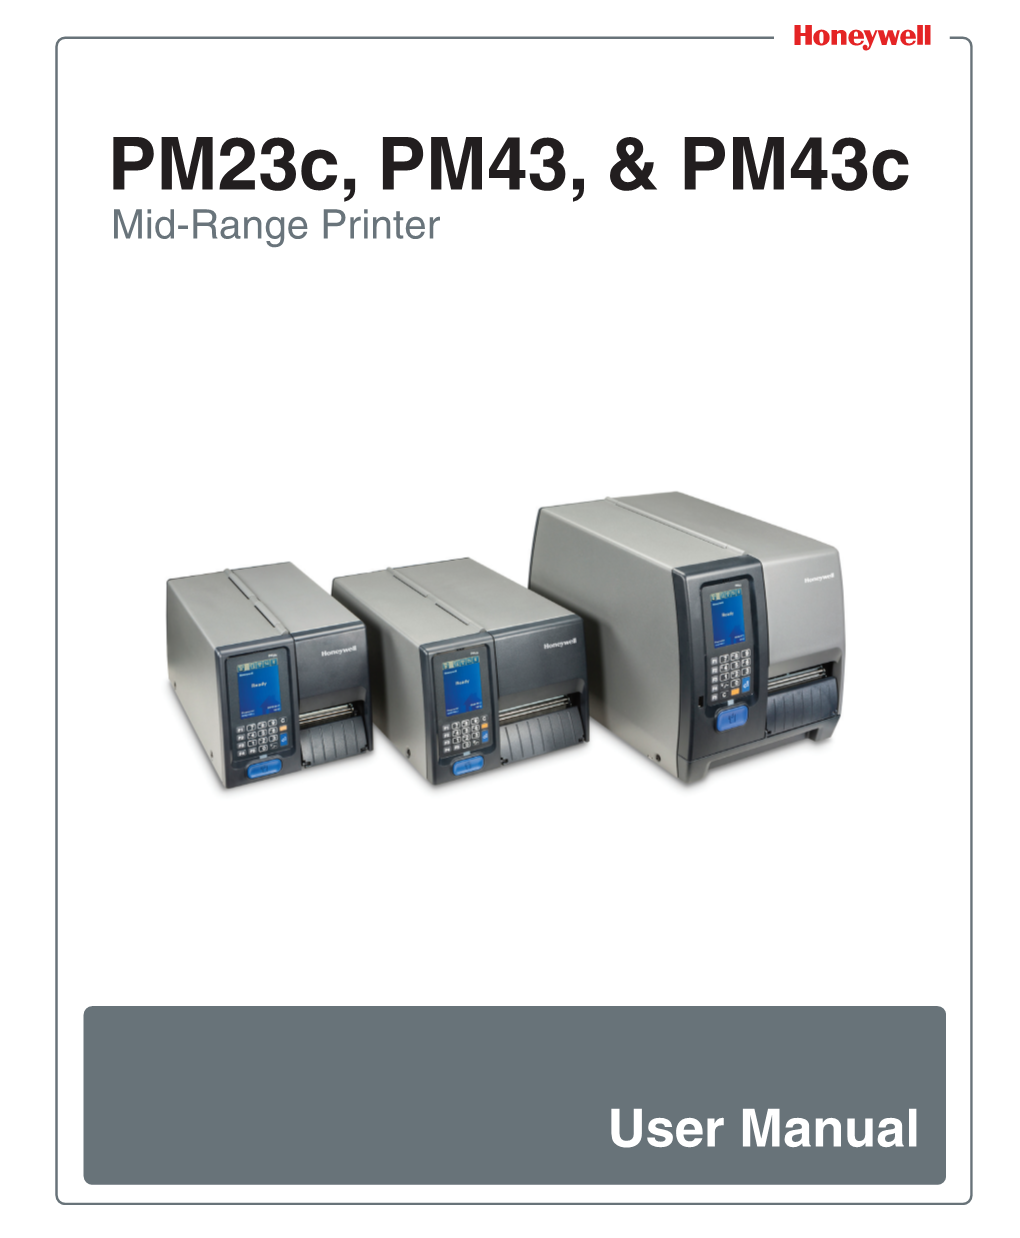 Pm23c, PM43, and Pm43c Mid-Range Printer User Manual Contents Contents